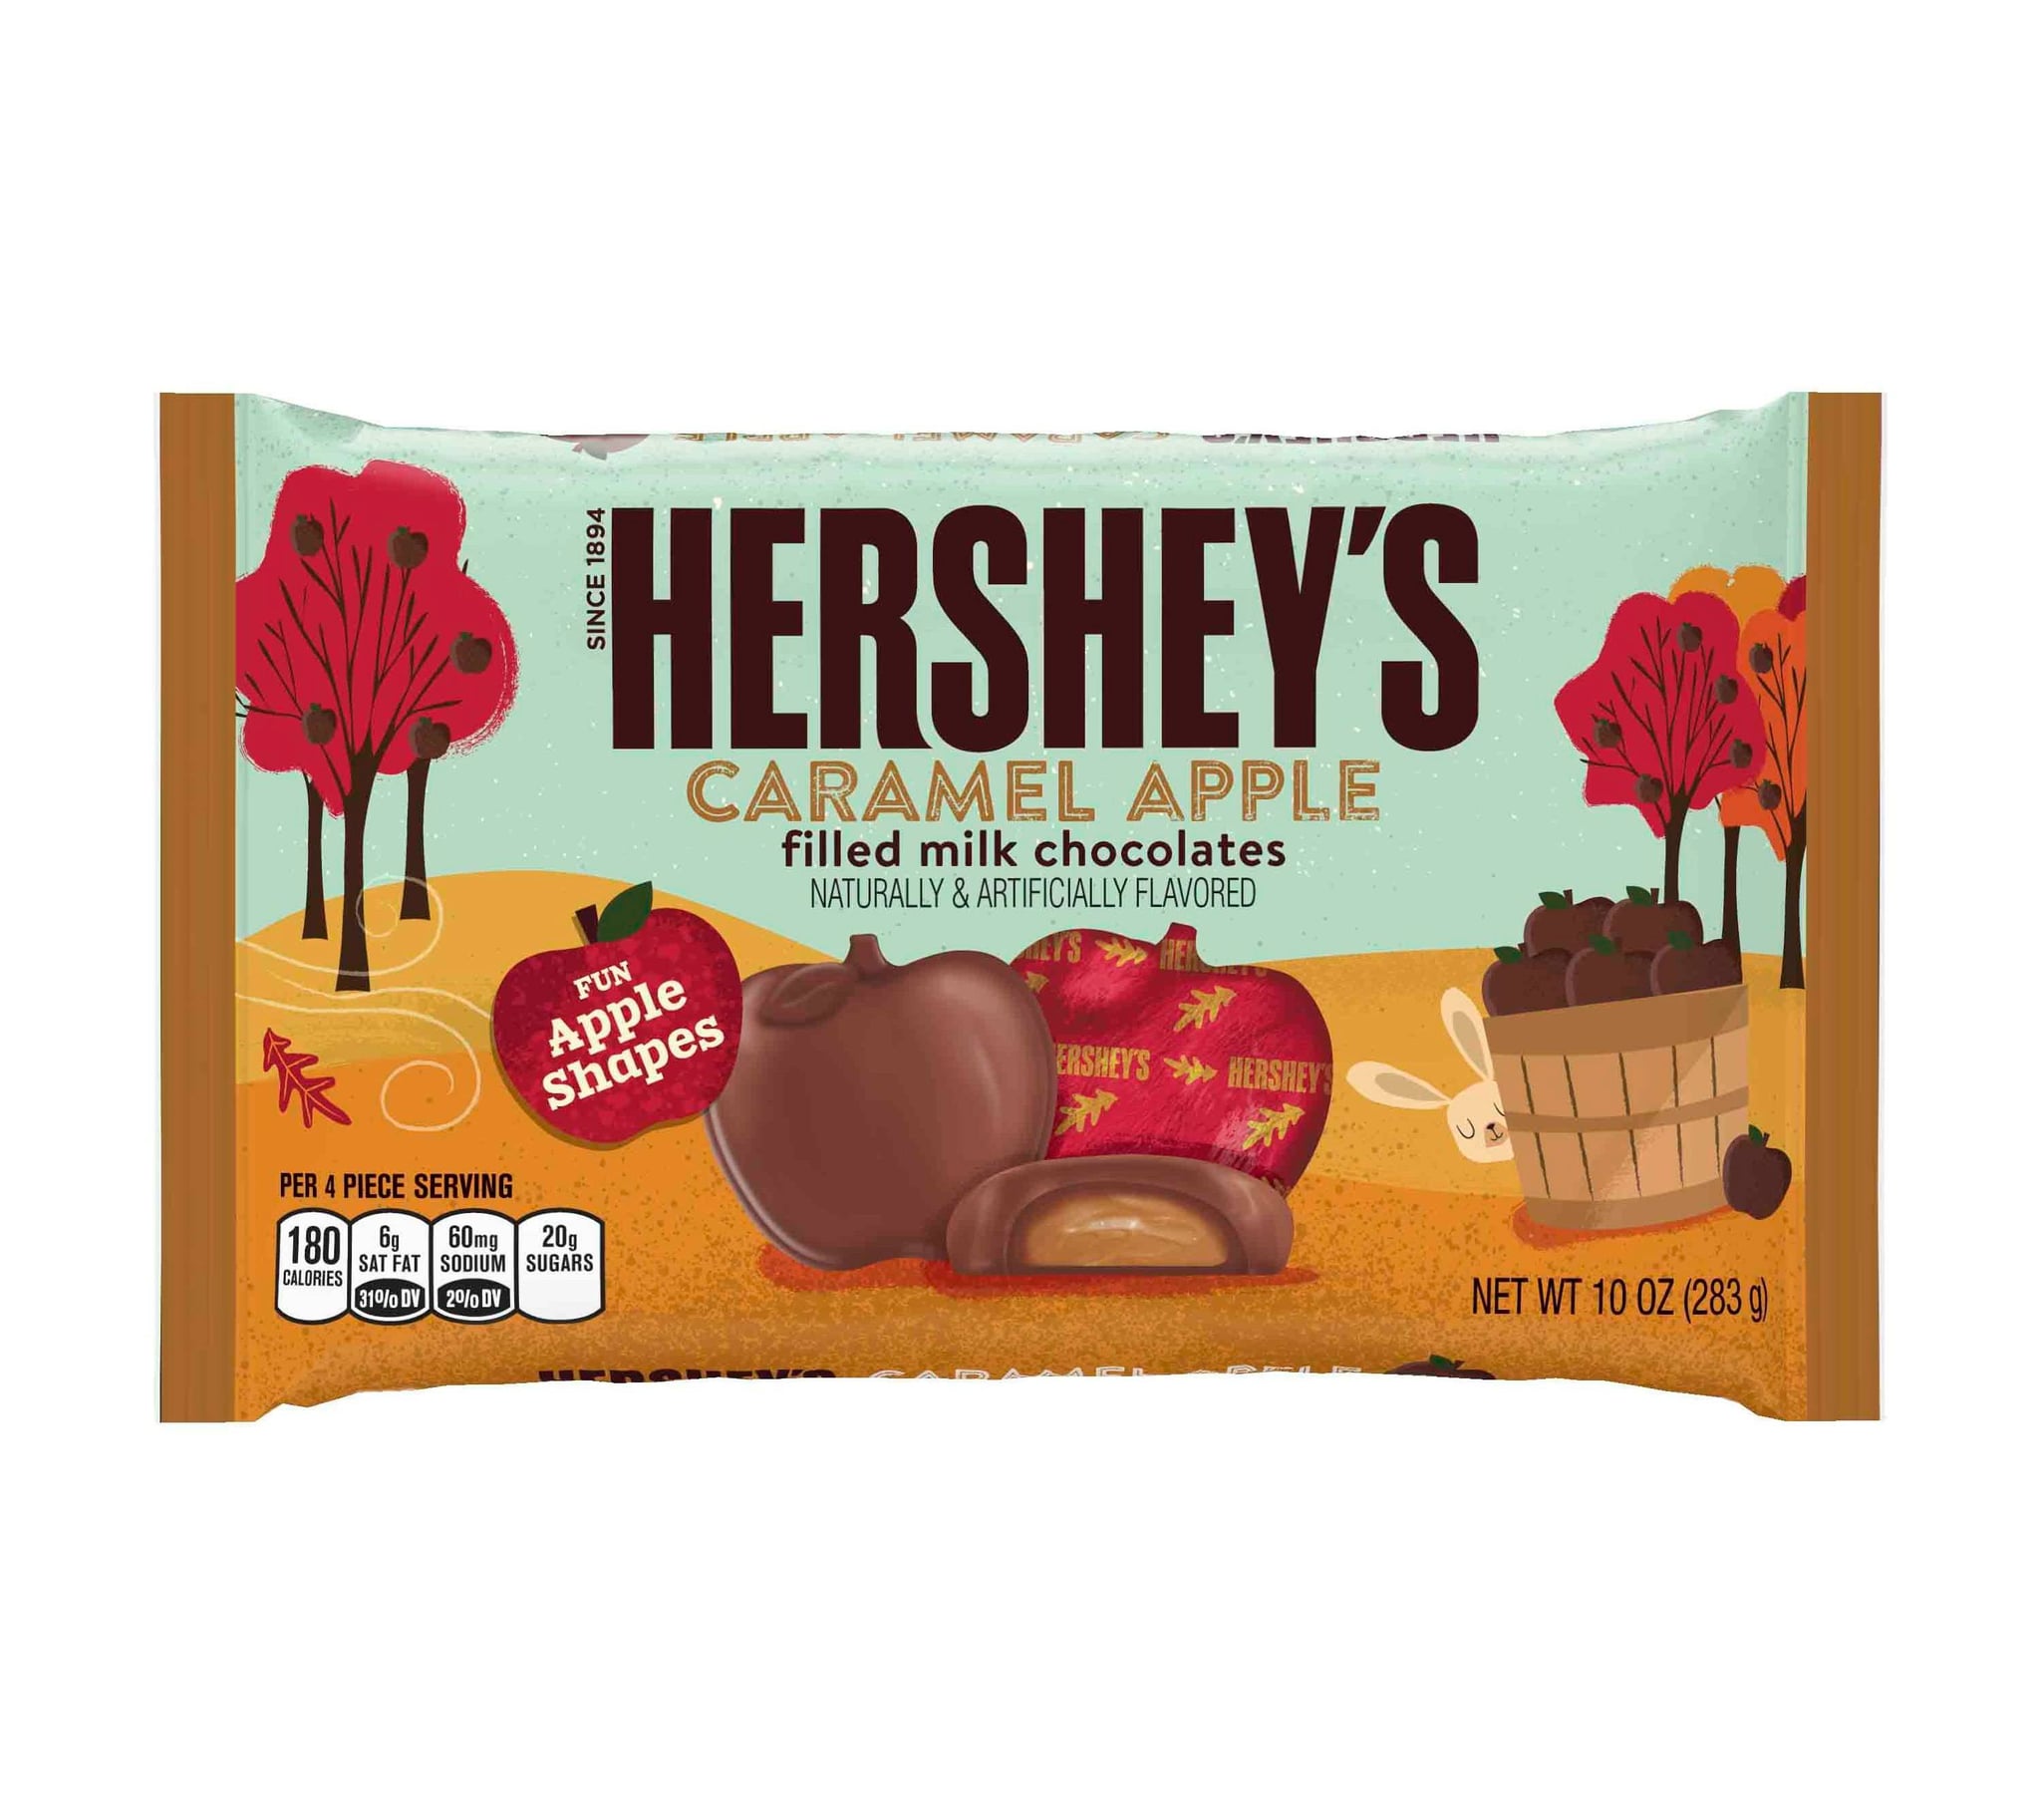 PopsugarLivingHershey'sHershey's Halloween Caramel-Filled Milk ChocolatesYes, Caramel Apple Hershey's Kisses Do Exist — Here's Where to Find Them!September 25, 2017 by Terry CarterFirst Published: September 13, 20172K SharesChat with us on Facebook Messenger. Learn what's trending across POPSUGAR.Holy sh*t, we just discovered Hershey's Halloween Caramel Apple Filled Milk Chocolates and now we're obsessed. The apple-shaped milk chocolate candies are currently available at Target for $3.59, and they basically combine your favorite Fall treat (candy apples!) with Hershey's Kisses AND milk chocolate. Seriously, what more could you ask for? The Halloween treat first arrived in 2016, but now they're back on shelves. If you're looking for an alternative to pumpkin spice everything (trust us, we tried Hershey's Kisses Pumpkin Spice and it was not our favorite) then you might want to give this one a try. Now excuse us while we order up a batch to conduct our own taste test! Join the conversationChat with us on Faceb - 웹